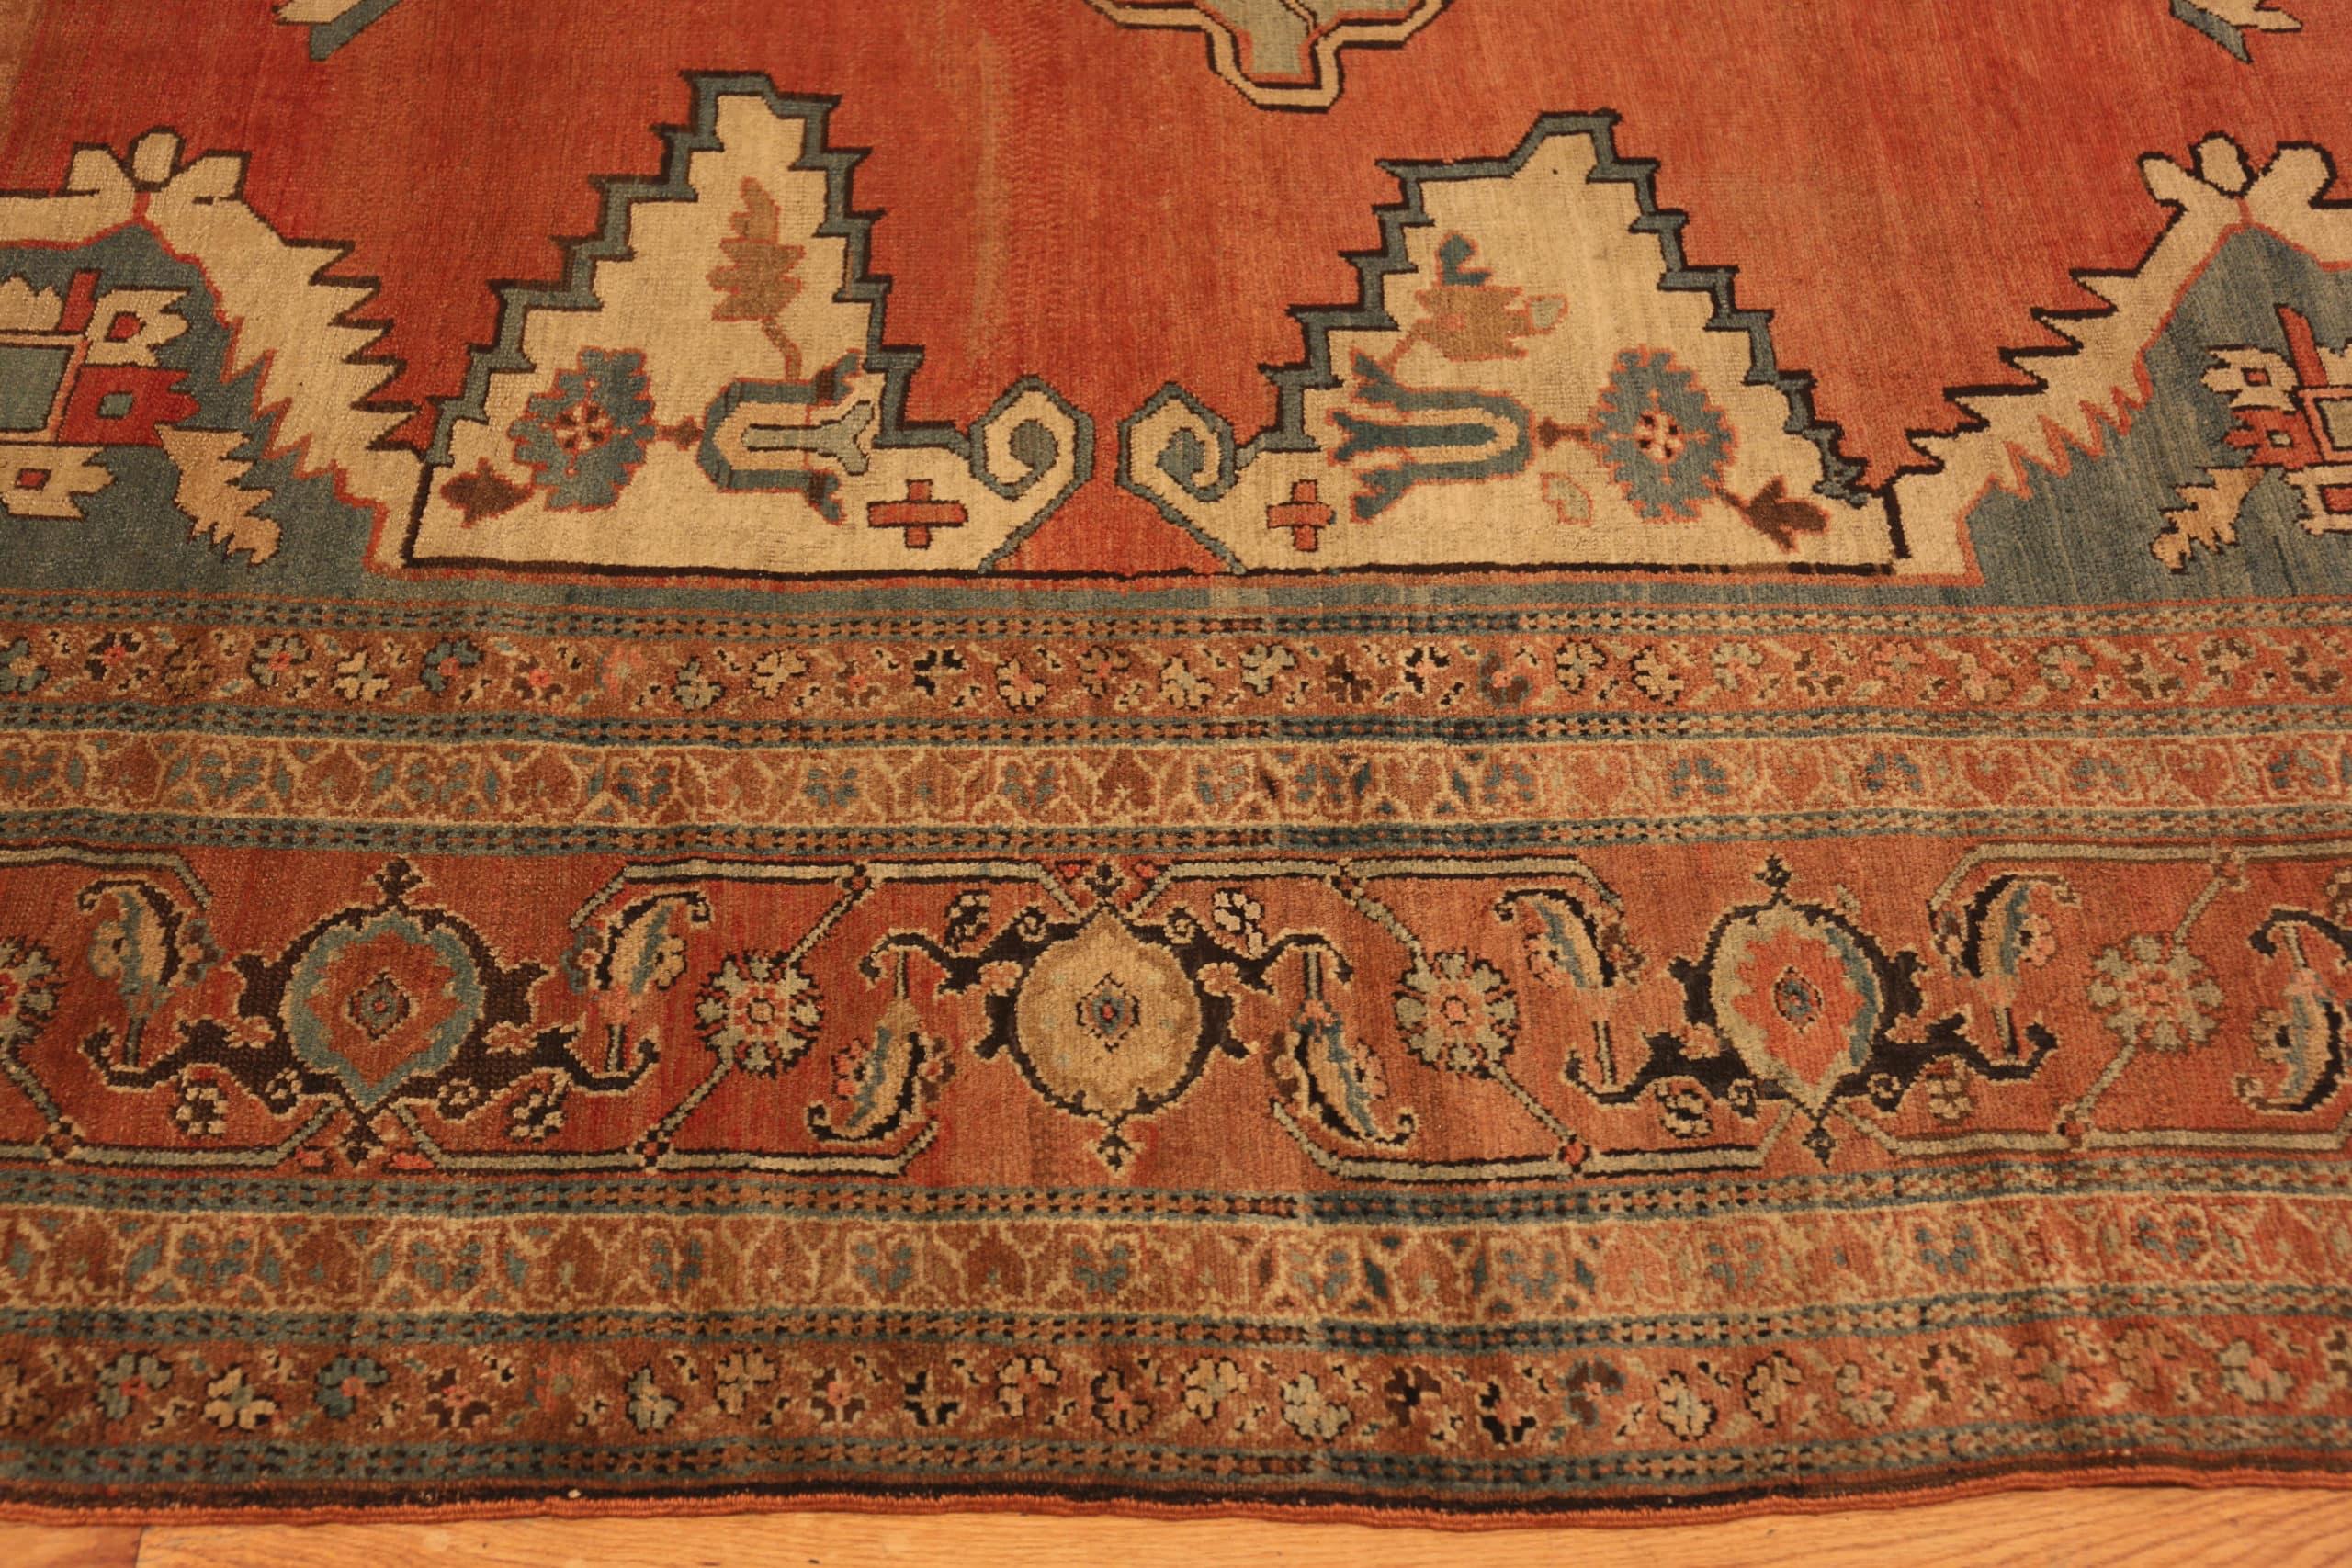 Room Size Antique Persian Serapi Rug, Country of origin: Persia, Circa date: 1900. Size: 10 ft 7 in x 12 ft 2 in (3.23 m x 3.71 m)

